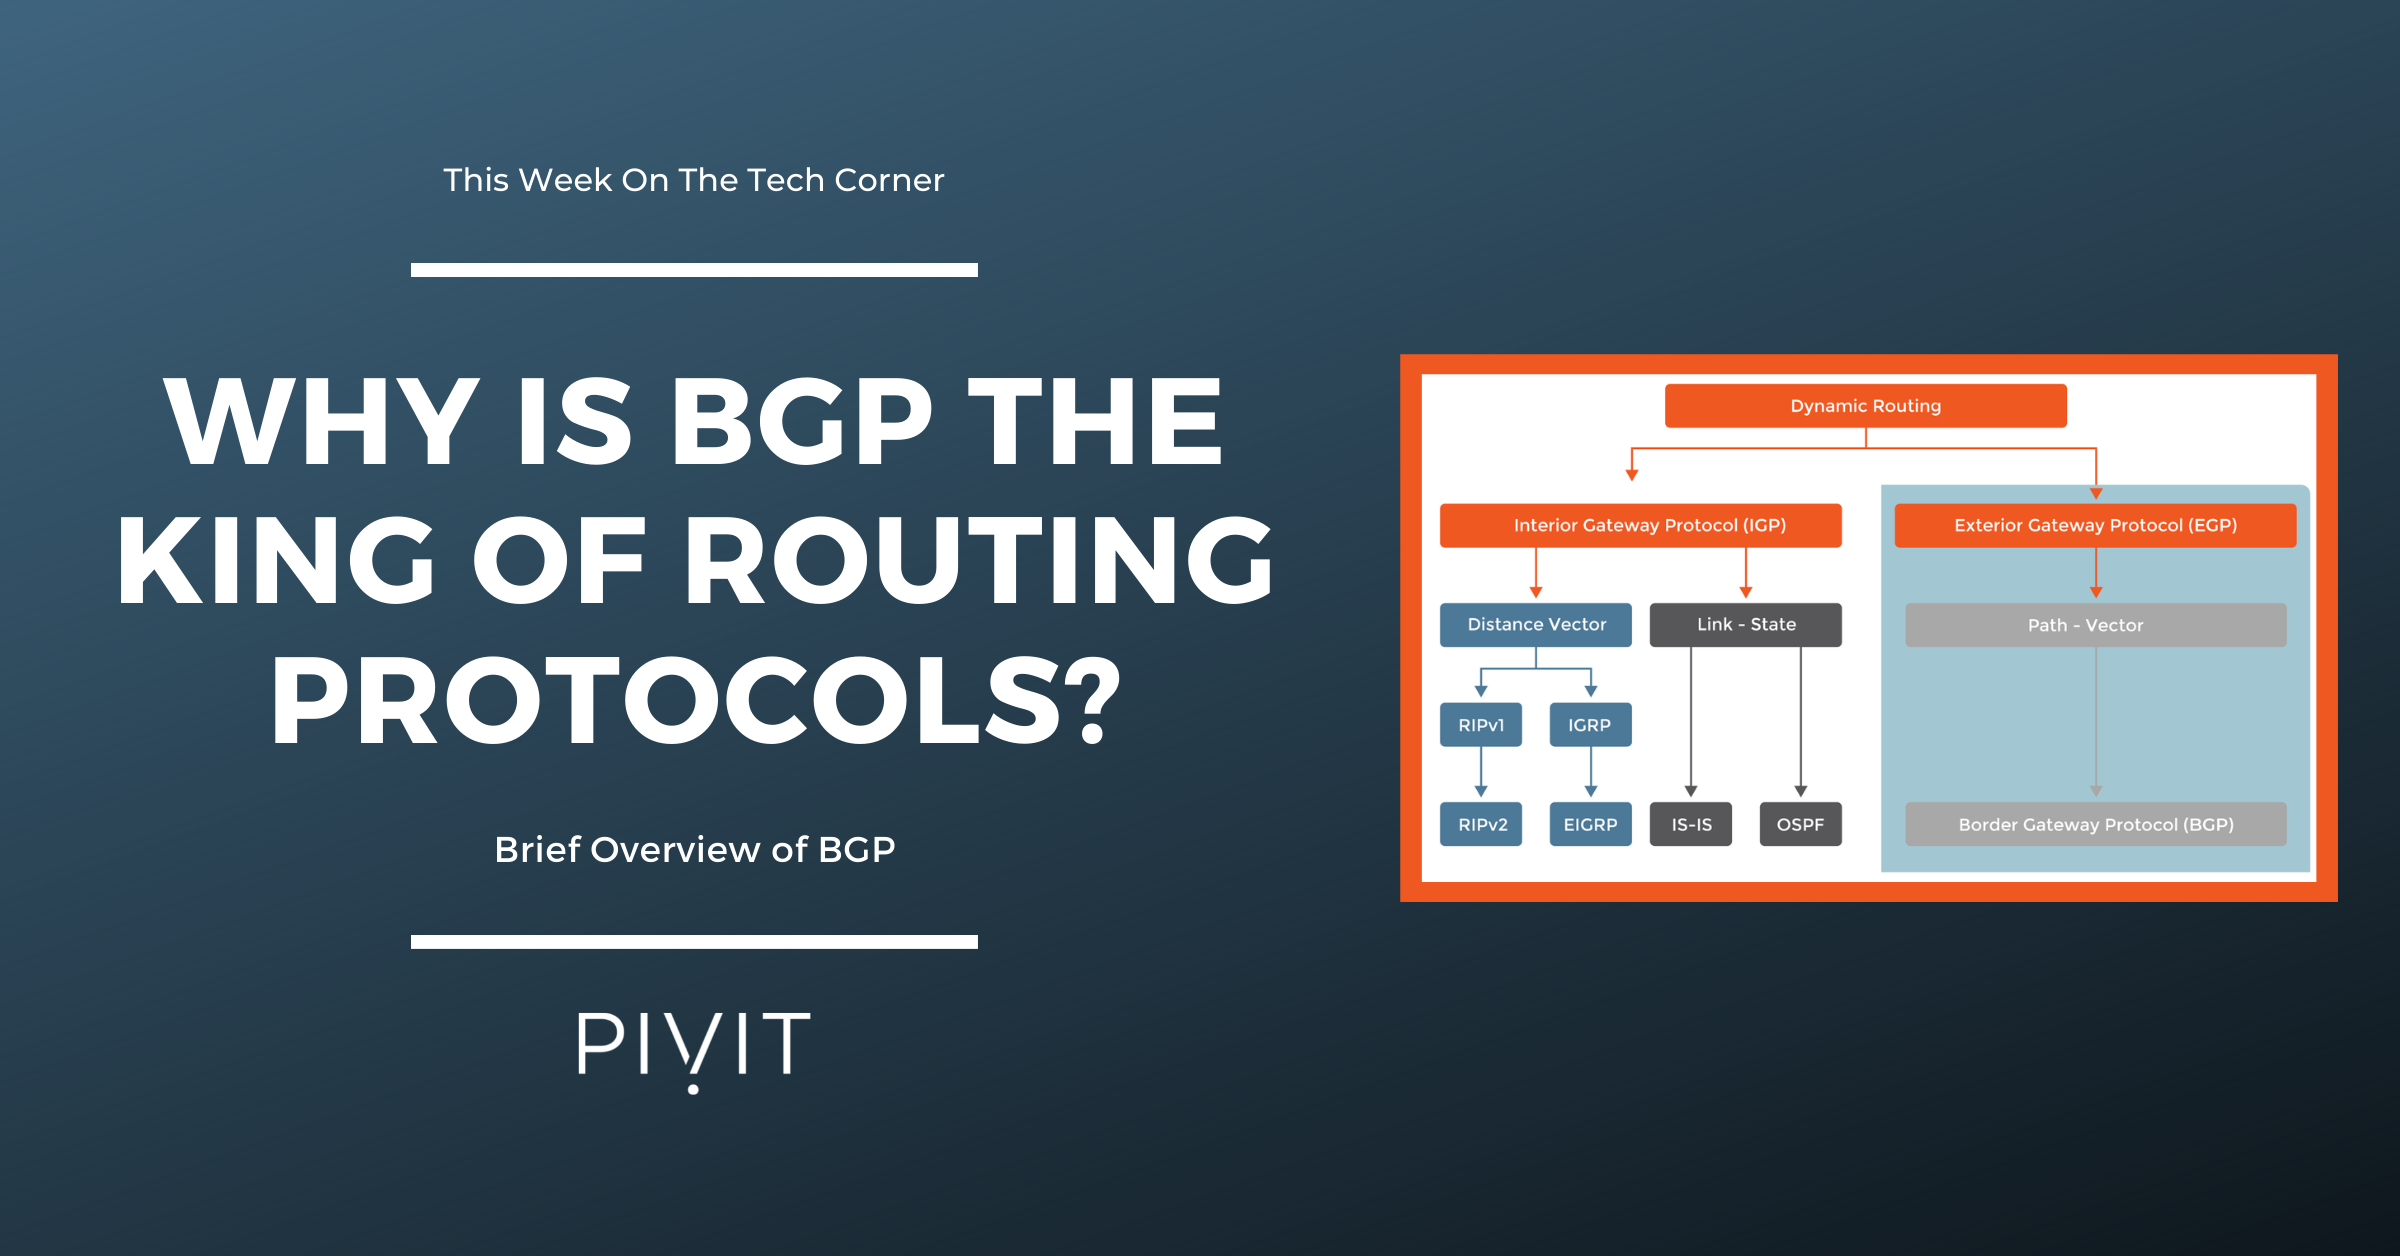 Why Is BGP the King of Routing Protocols - a brief overview